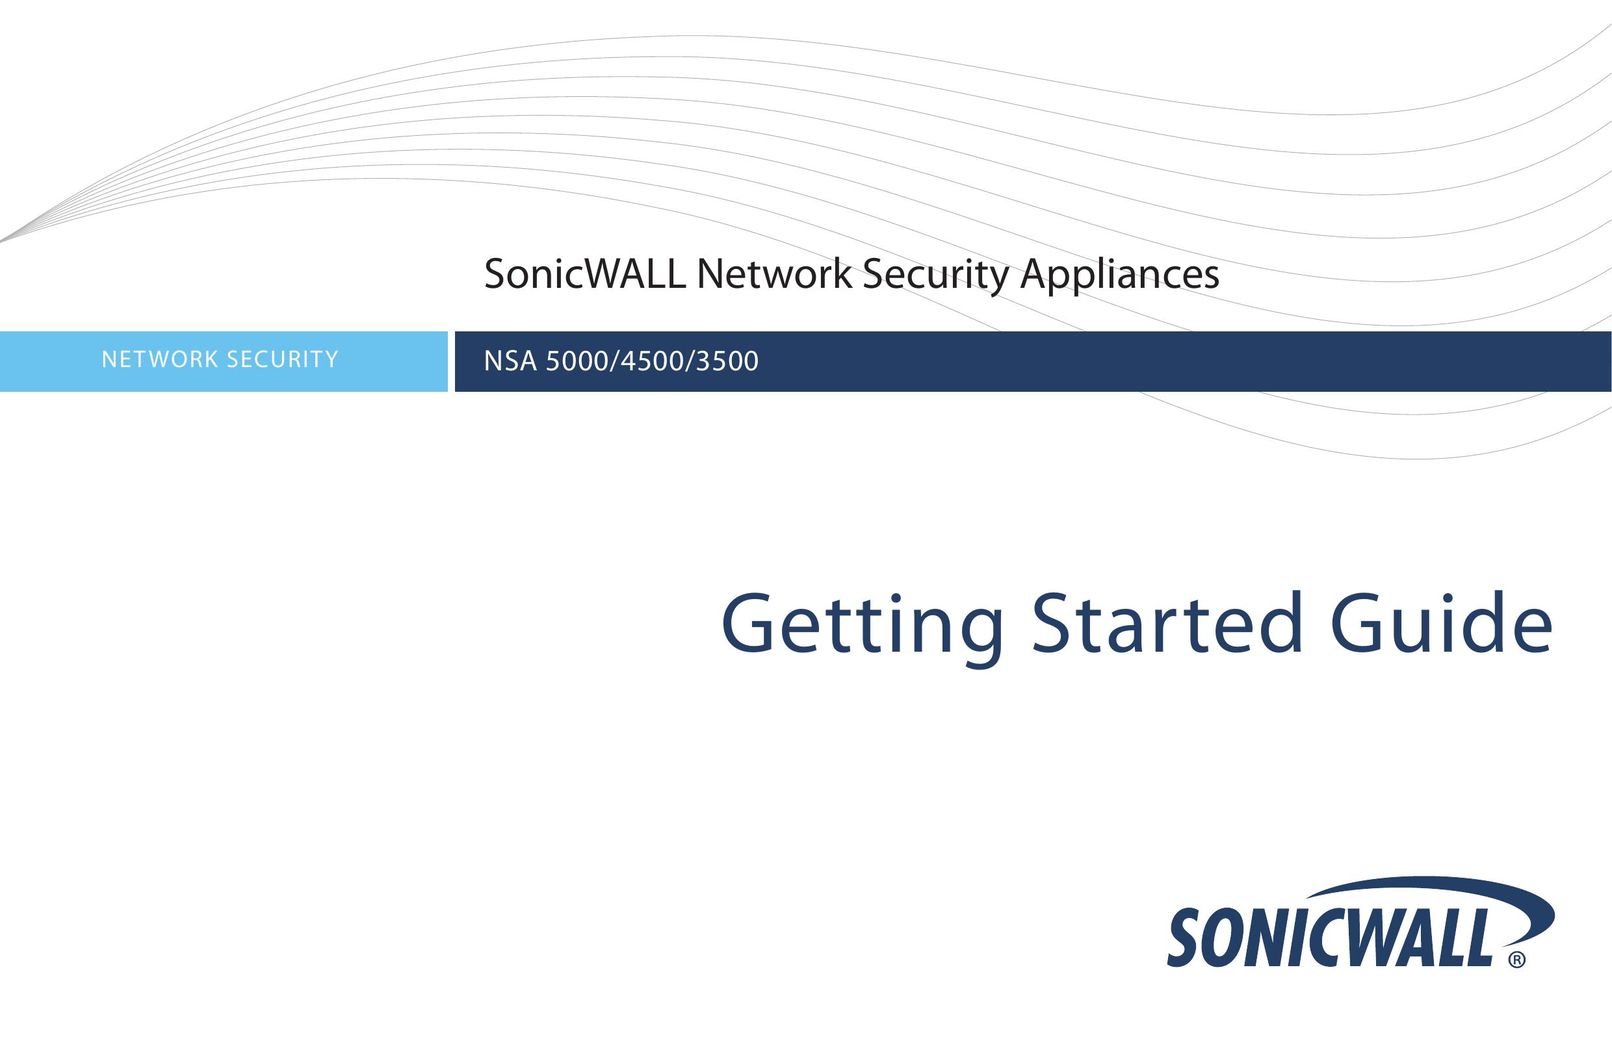 SonicWALL 4500 Home Security System User Manual